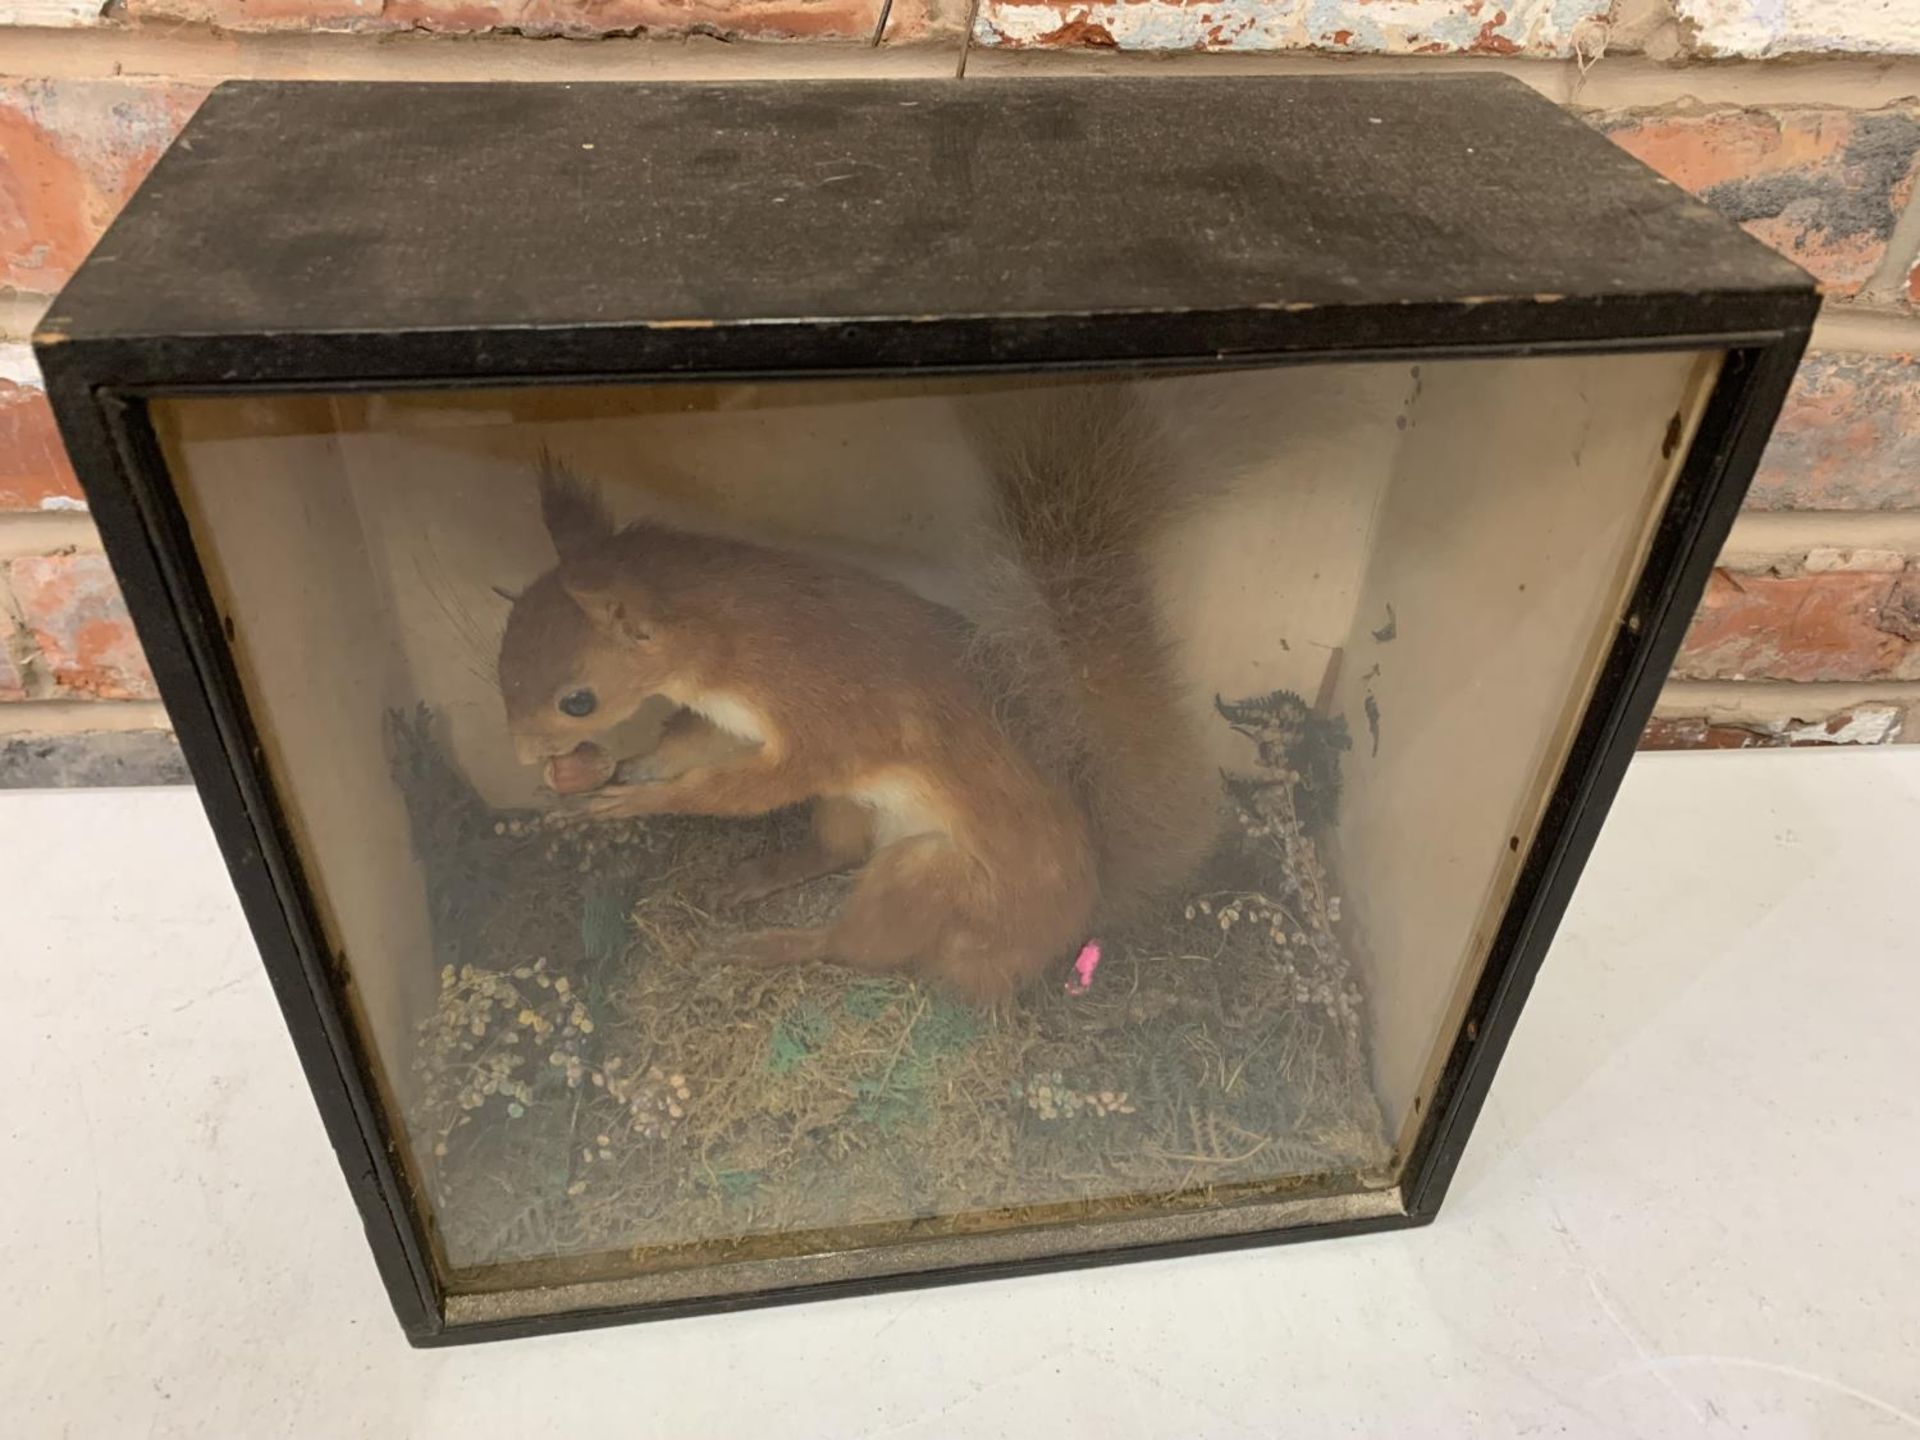 A WOODEN AND GLASS CASED TAXIDERMY OF A RED SQUIRREL WITH A NUT